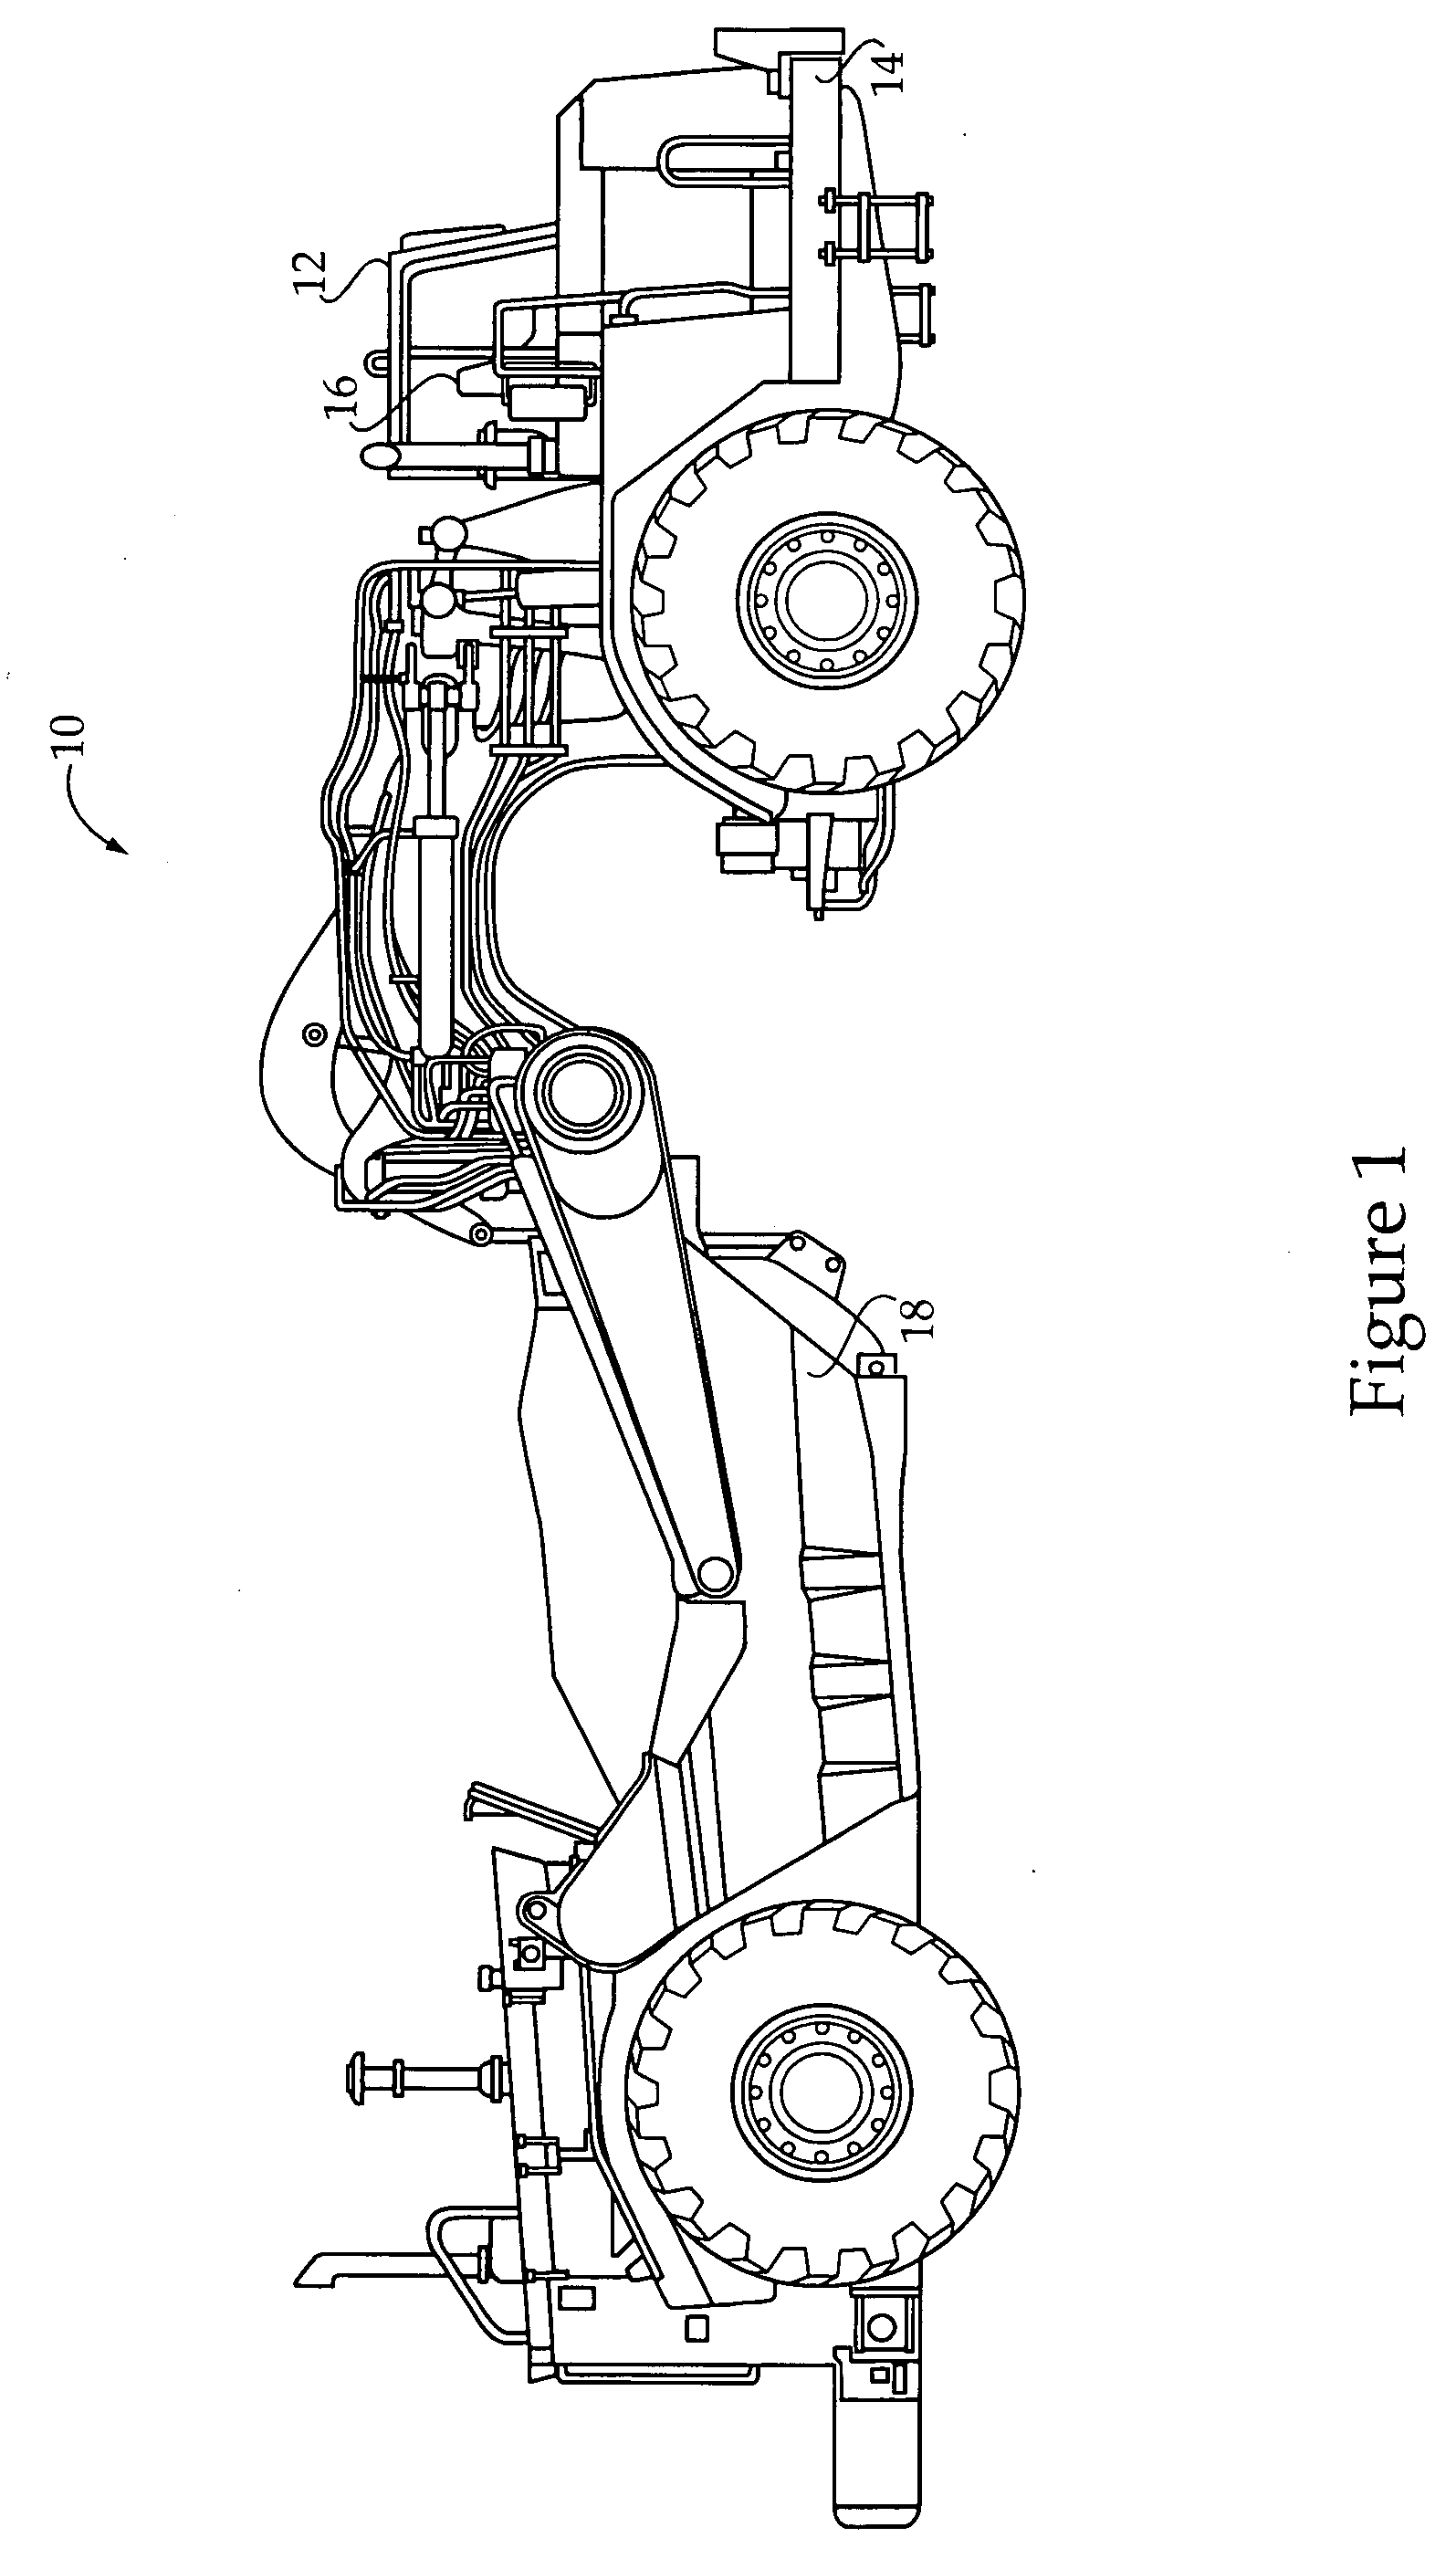 Suspension system for a seat assembly including an array of fluid chambers and machine using same